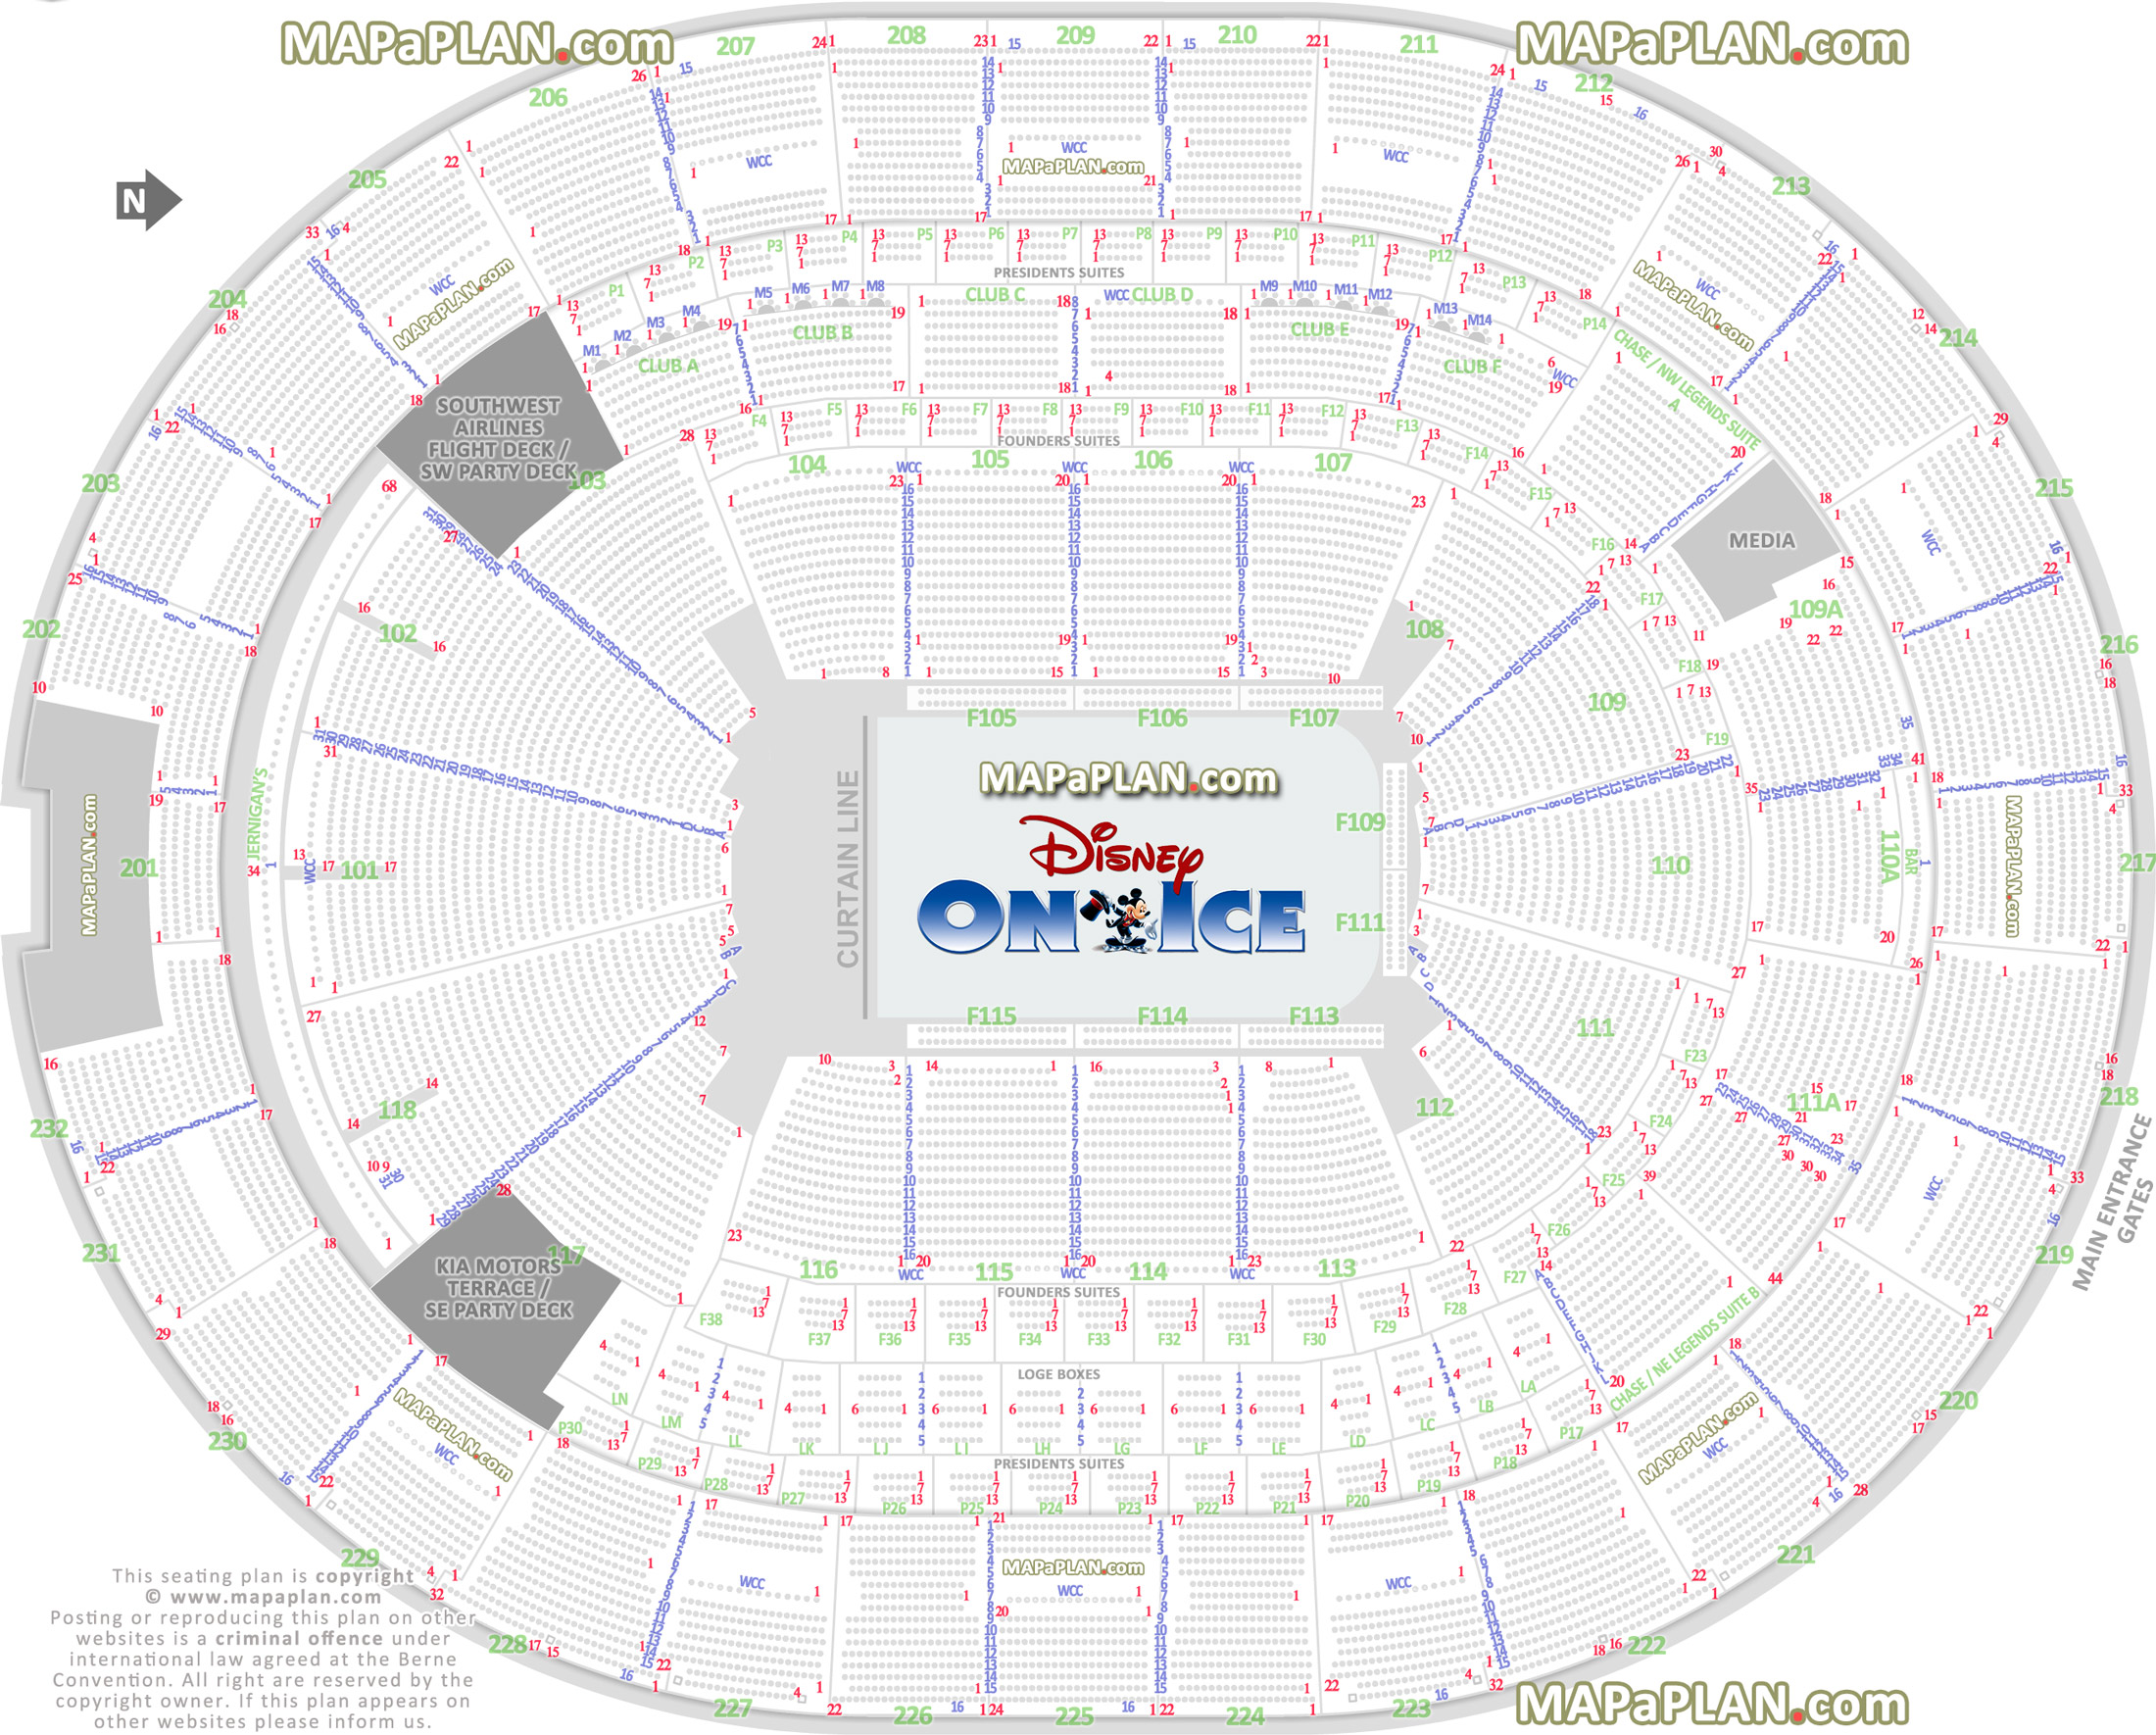 disney ice show arrangement review diagram best partial obstructed view finder precise aisle seat numbering location data Orlando Amway Center seating chart